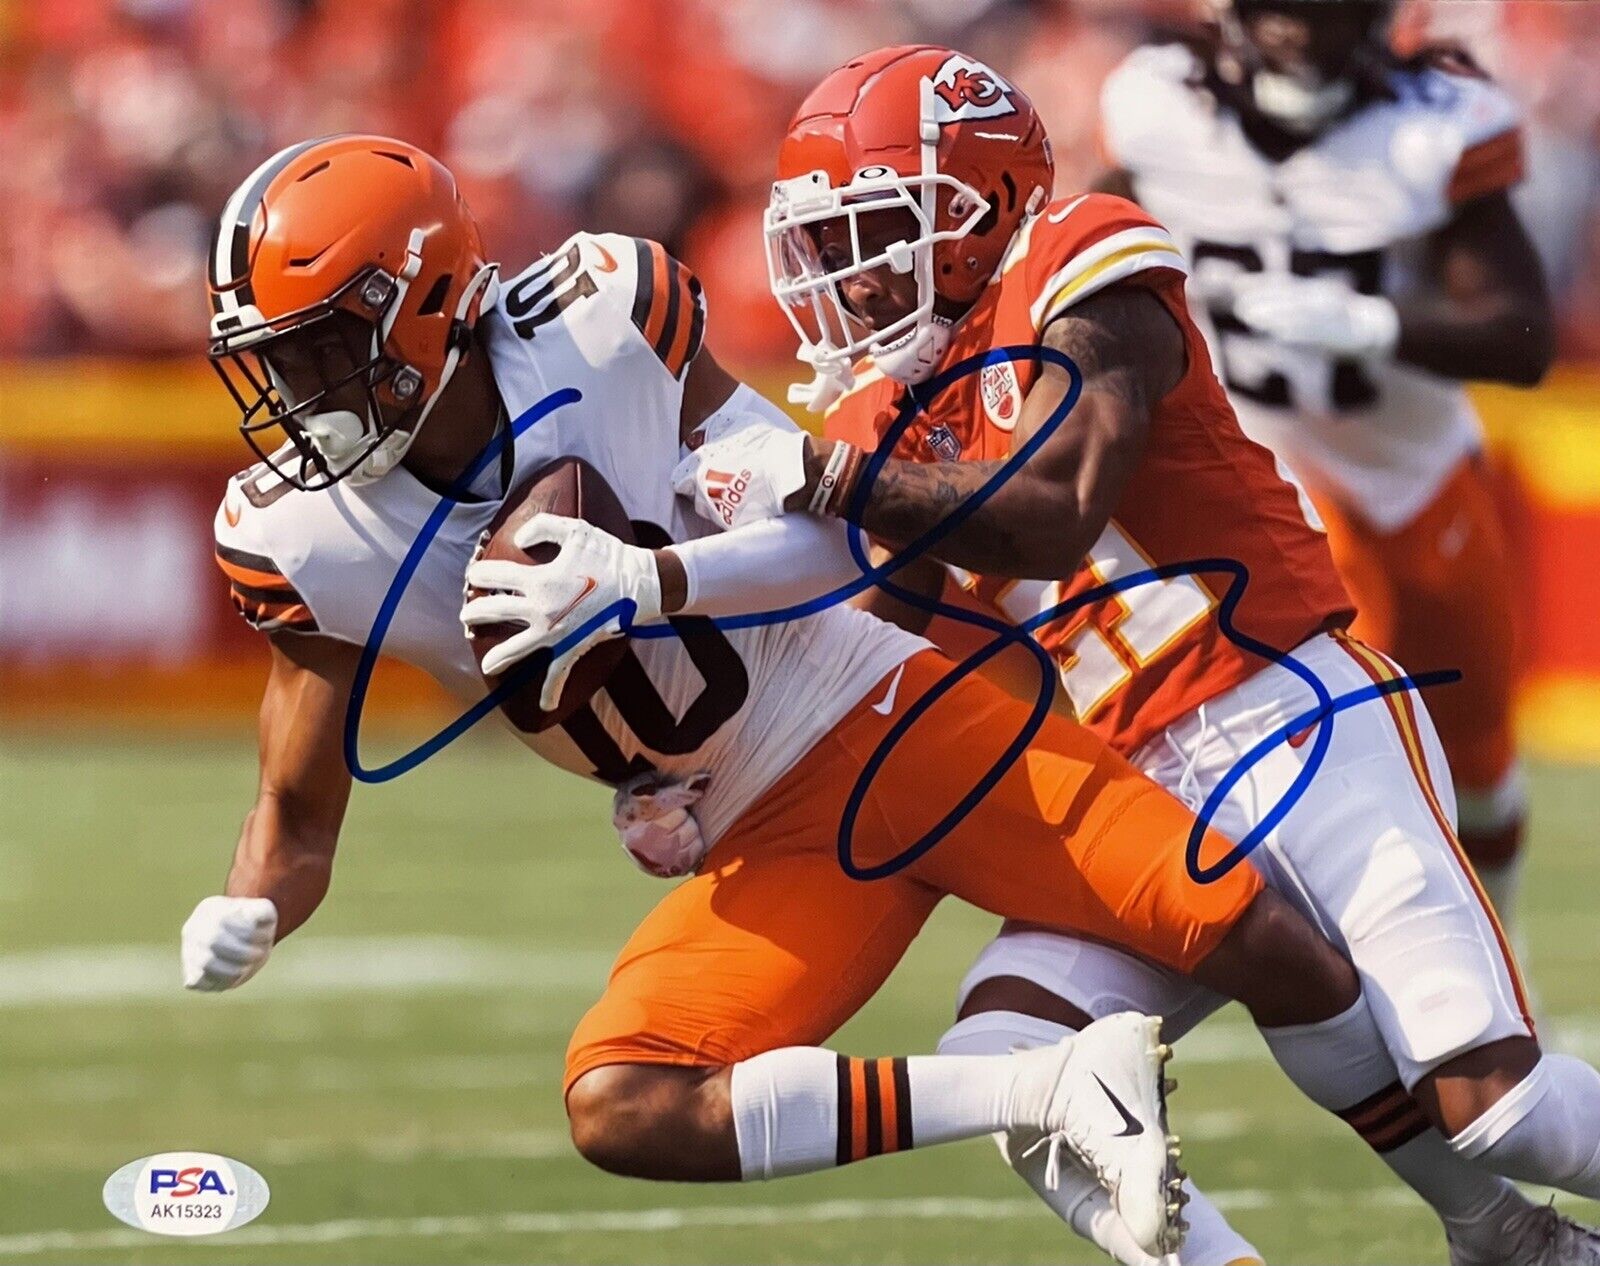 Anthony Schwartz Signed Autographed Cleveland Browns 8x10 Photo Poster painting PSA/DNA